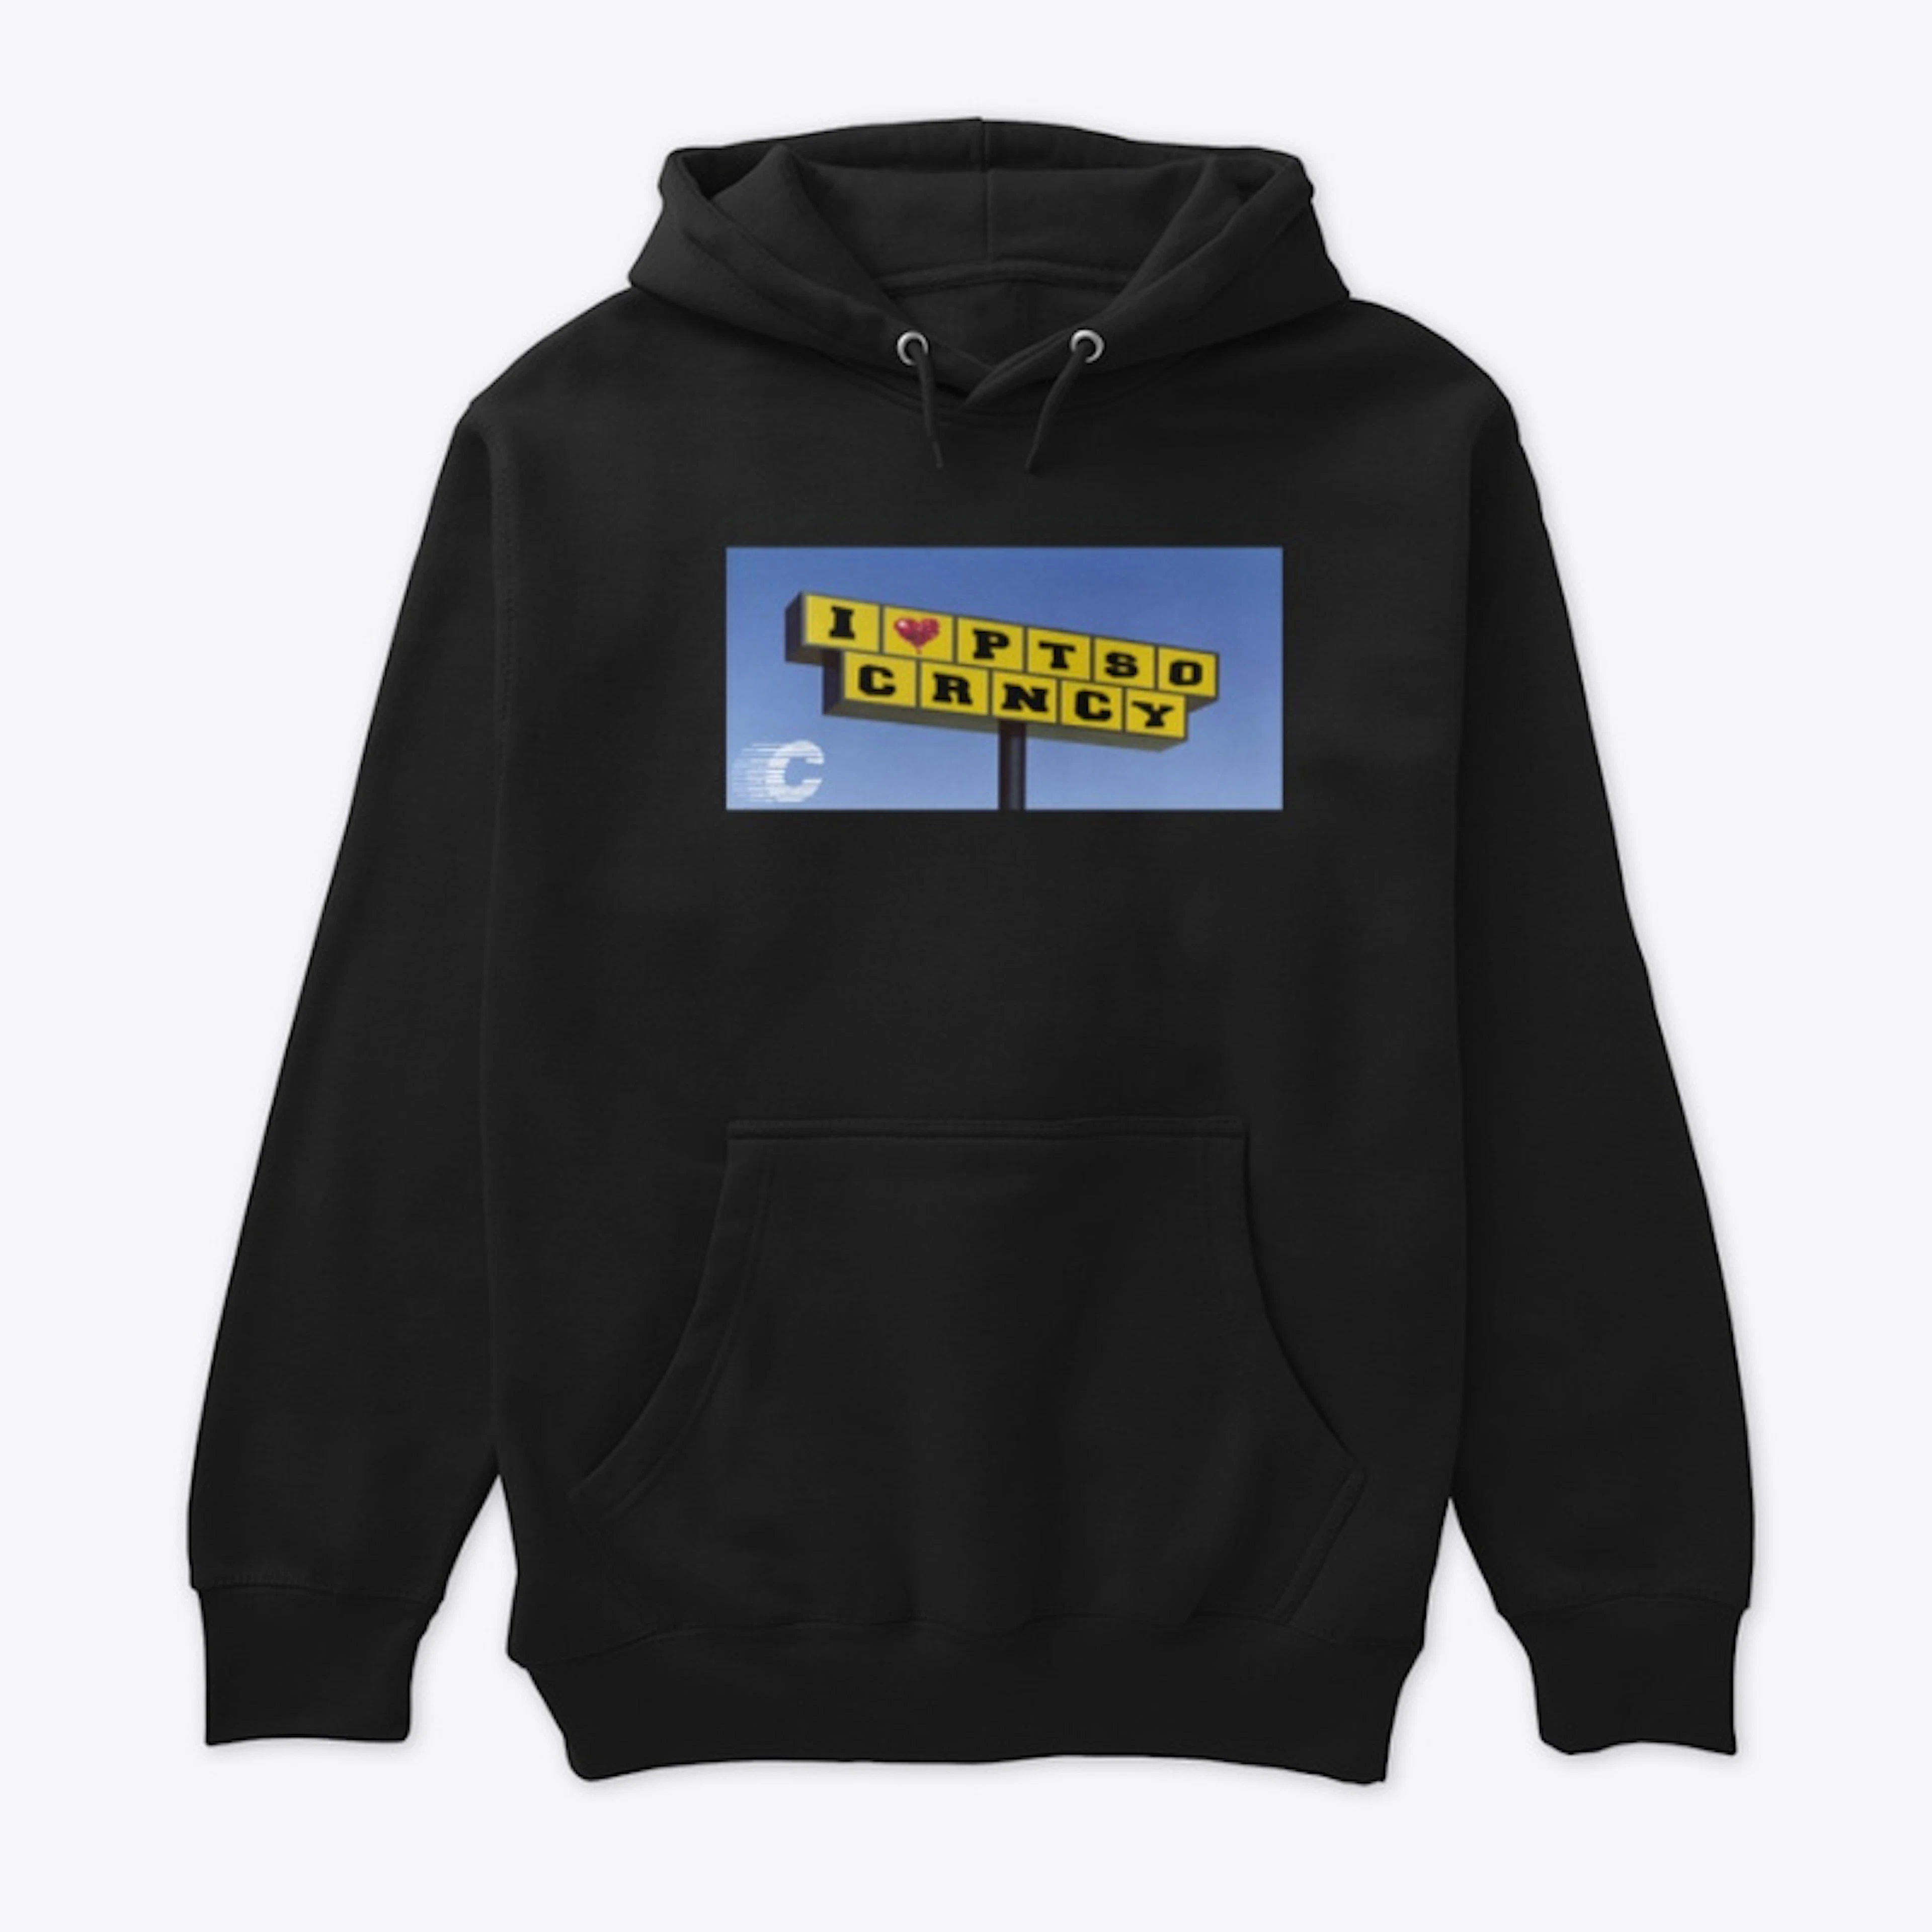 PTSO pullover (Waffle House)